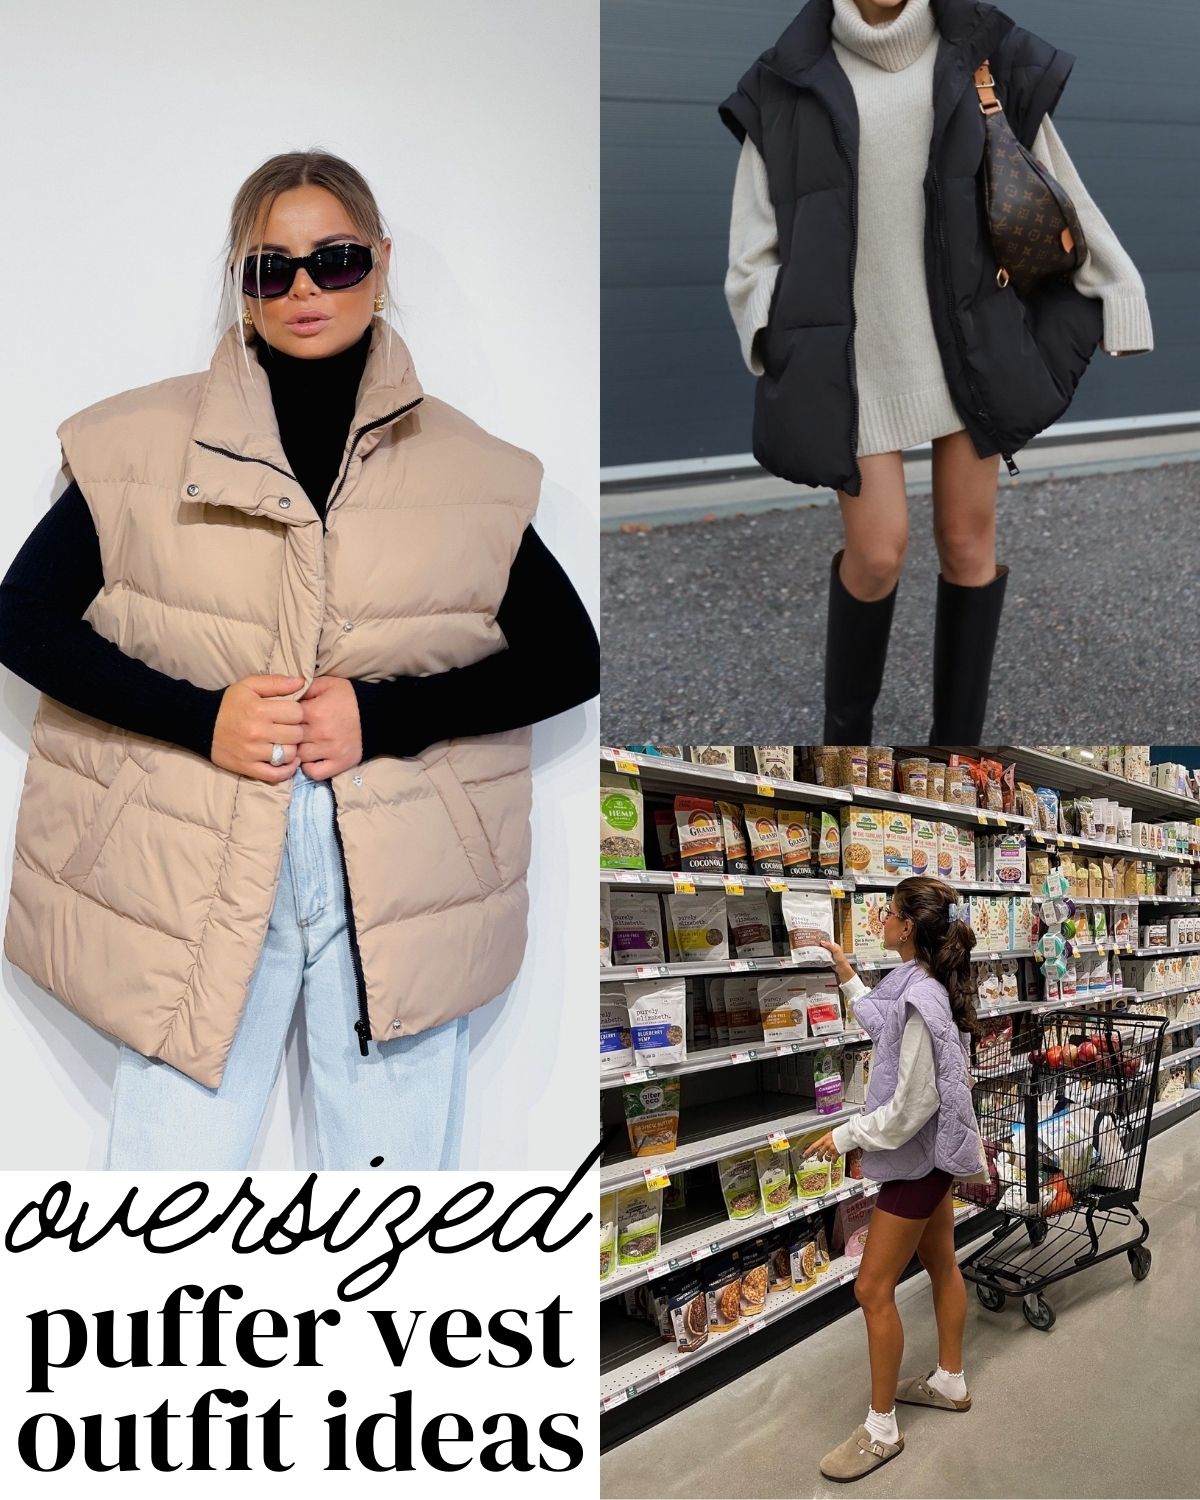 Oversized puffer vests